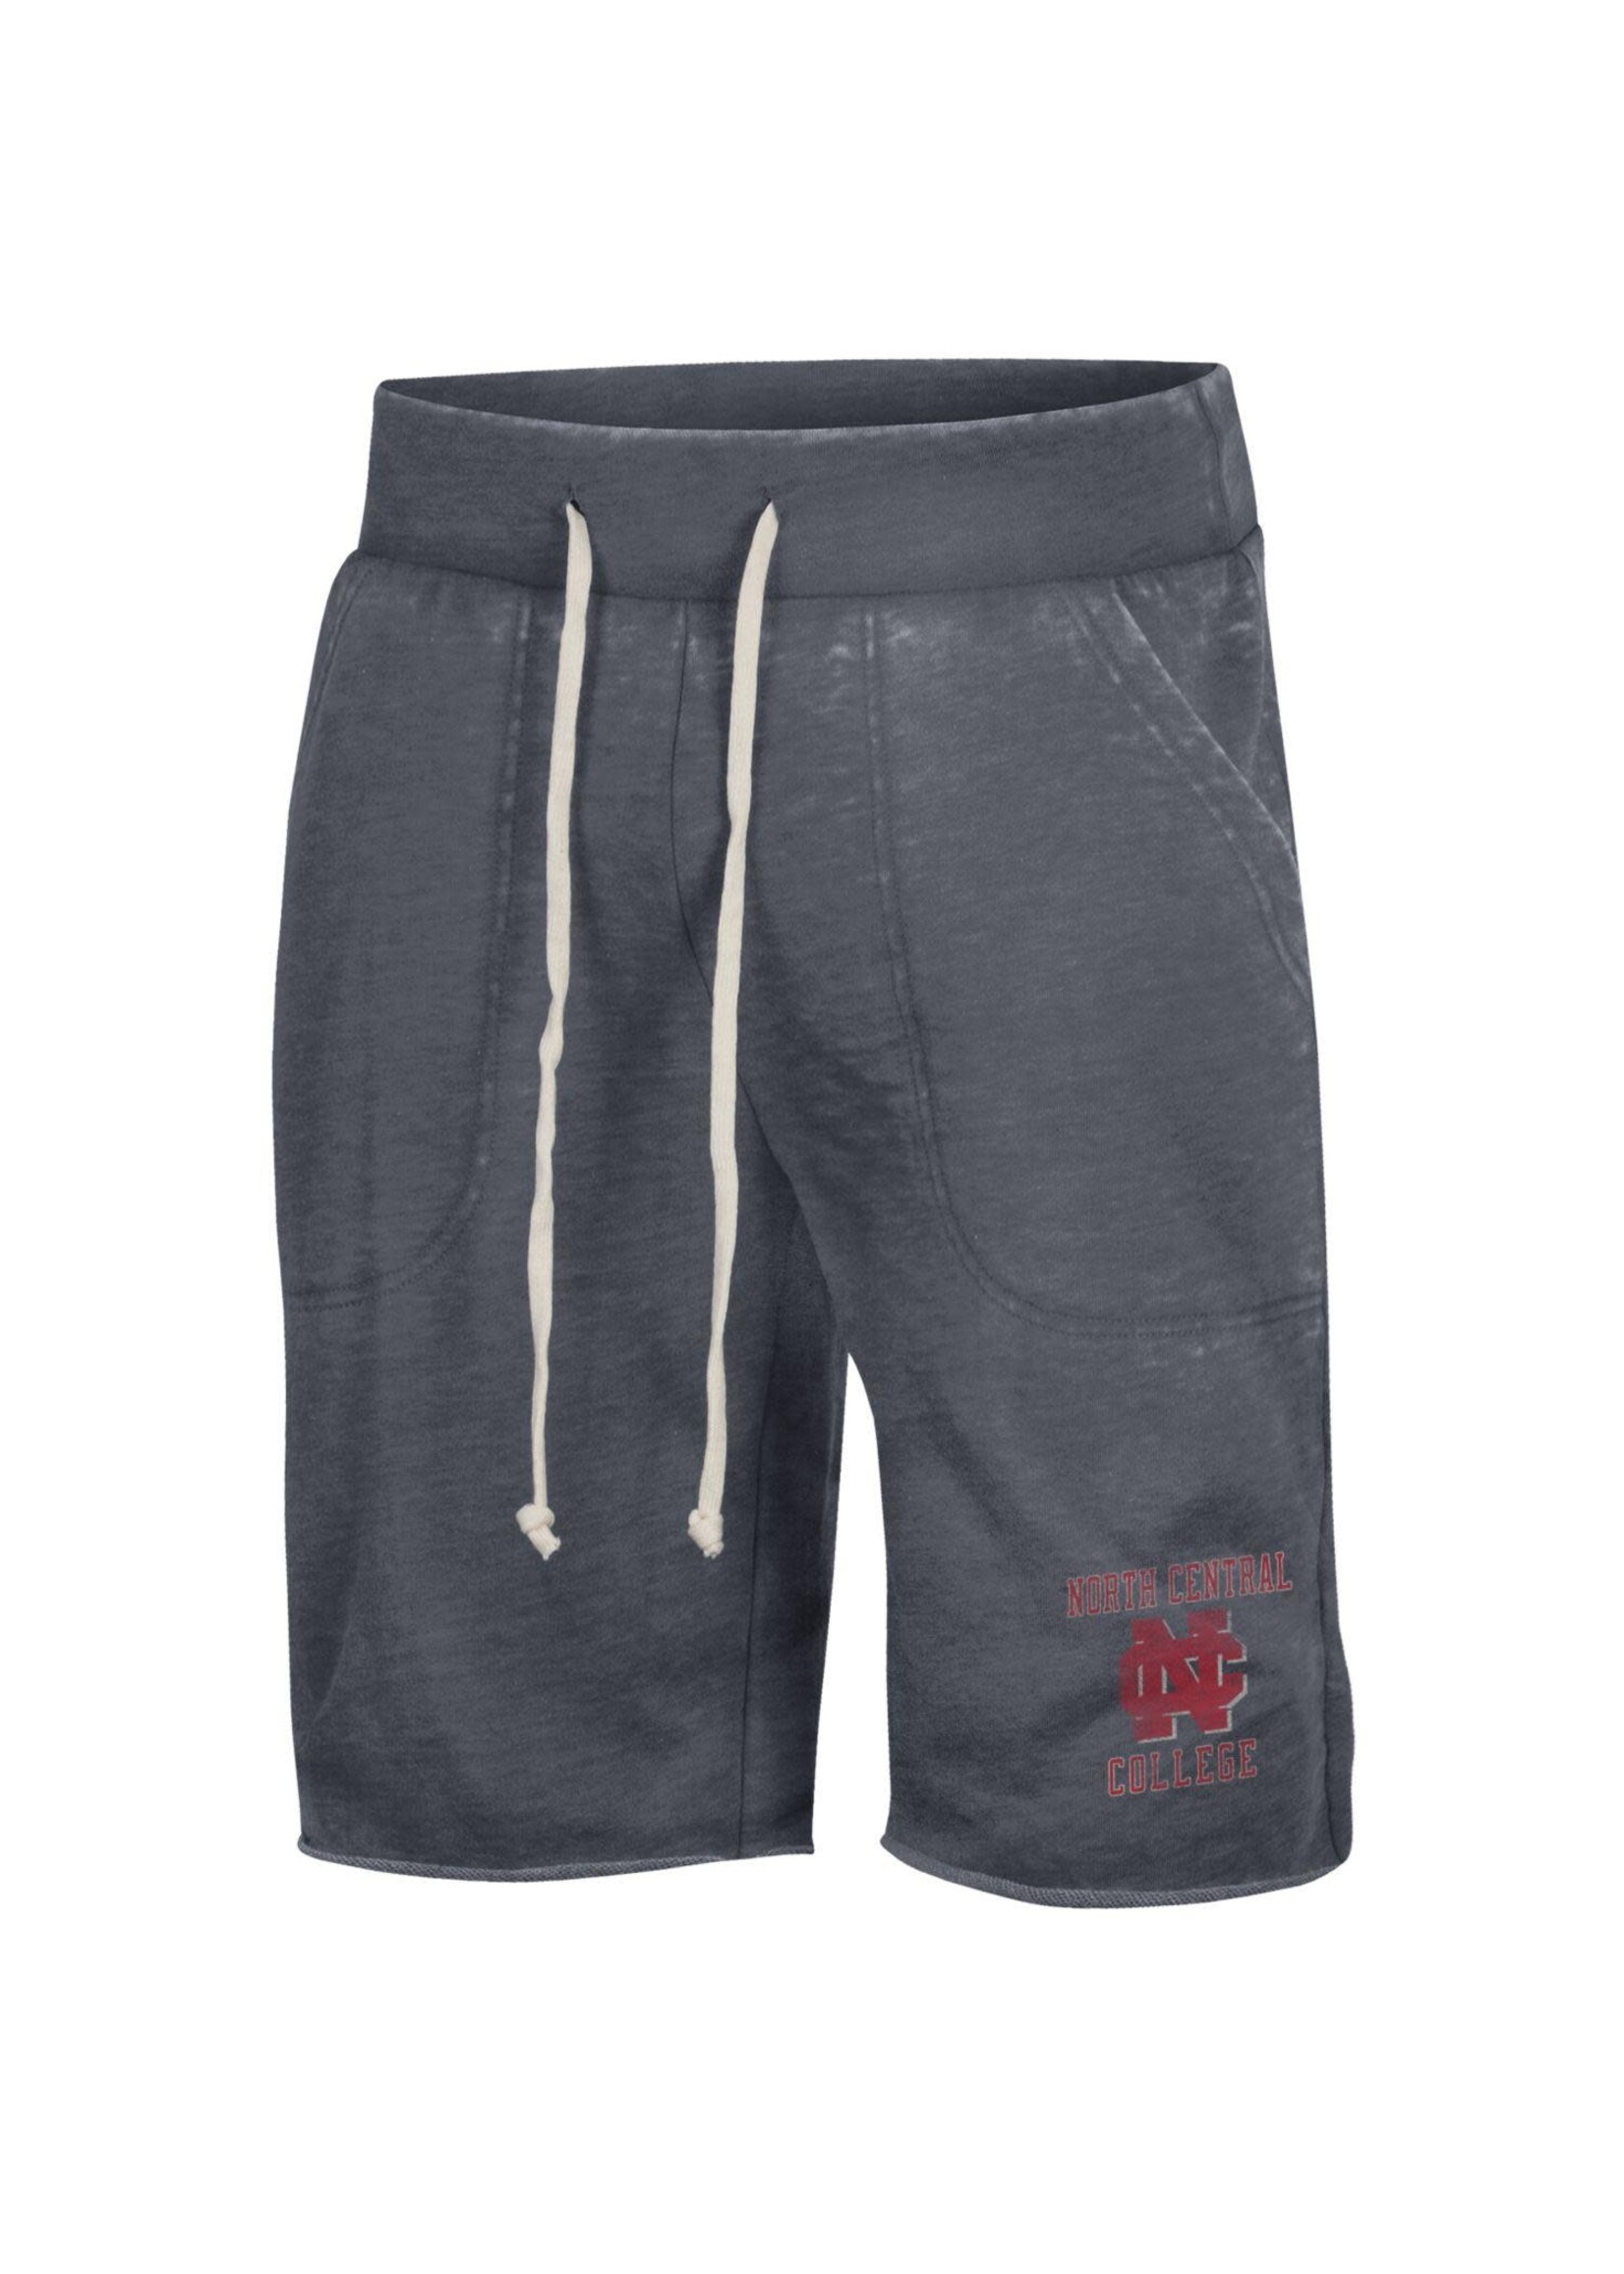 Gear For Sports Victory Shorts